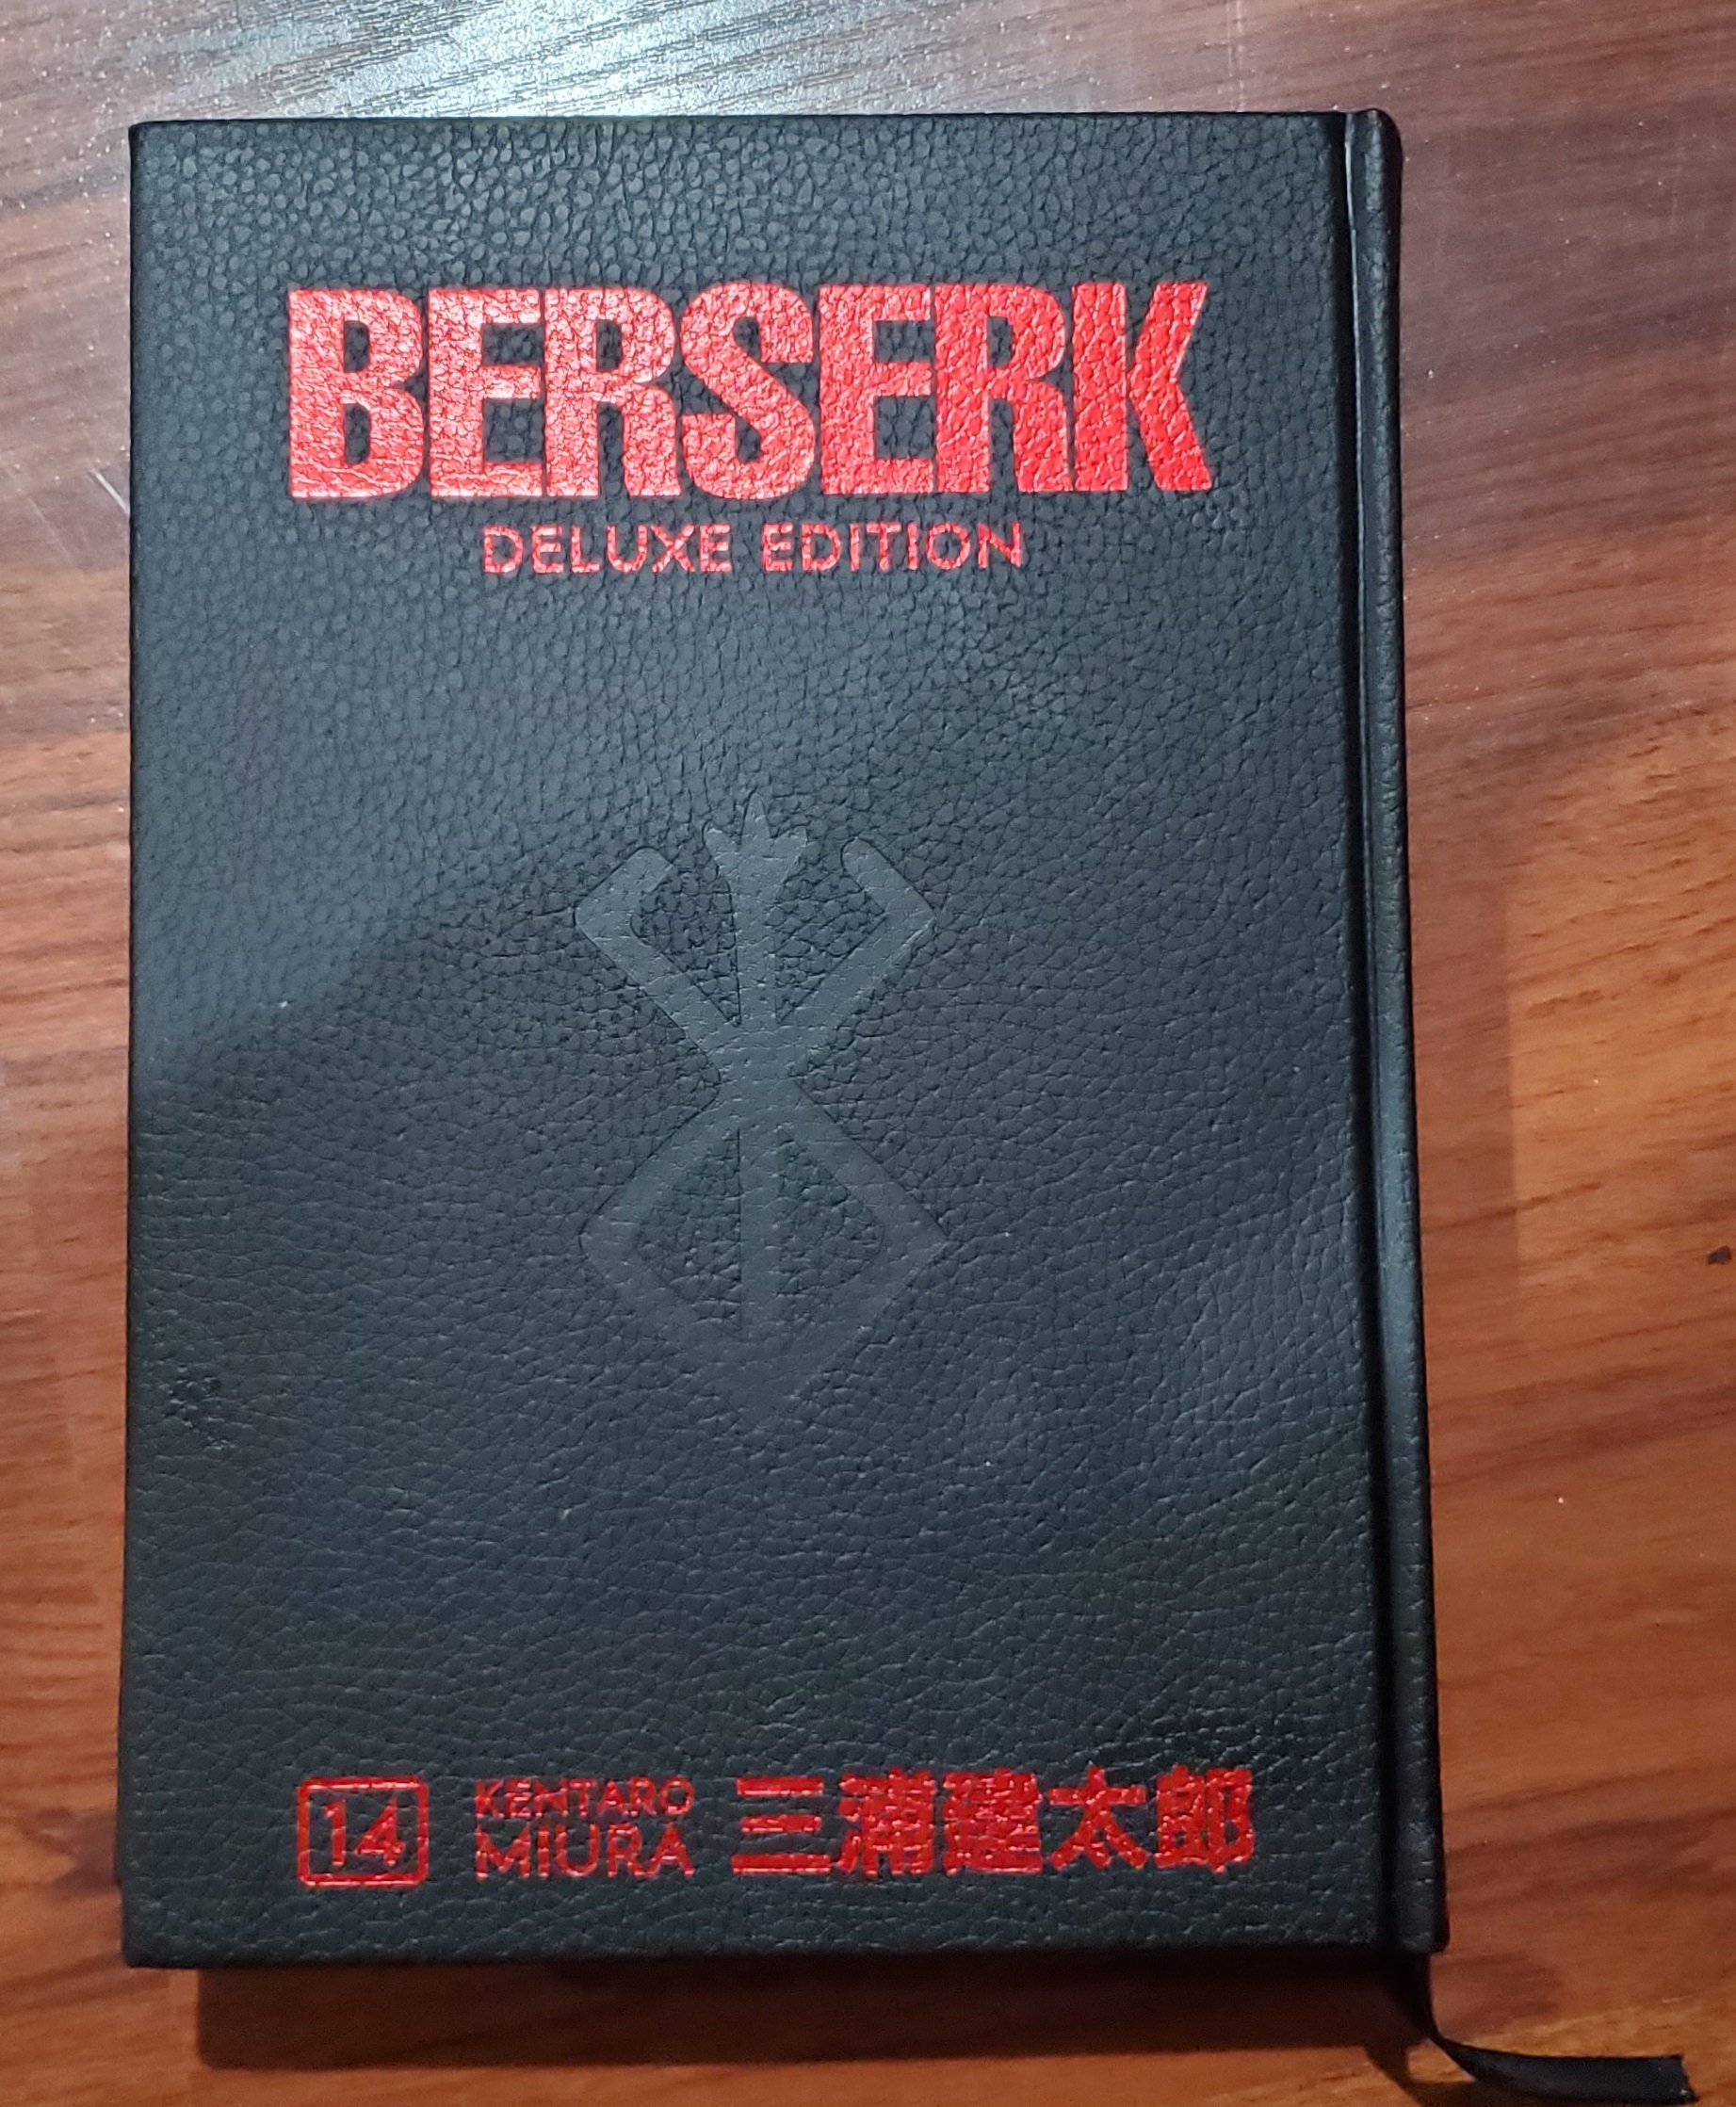 If my math is right, Berserk Deluxe Volume 13 will be the cause of